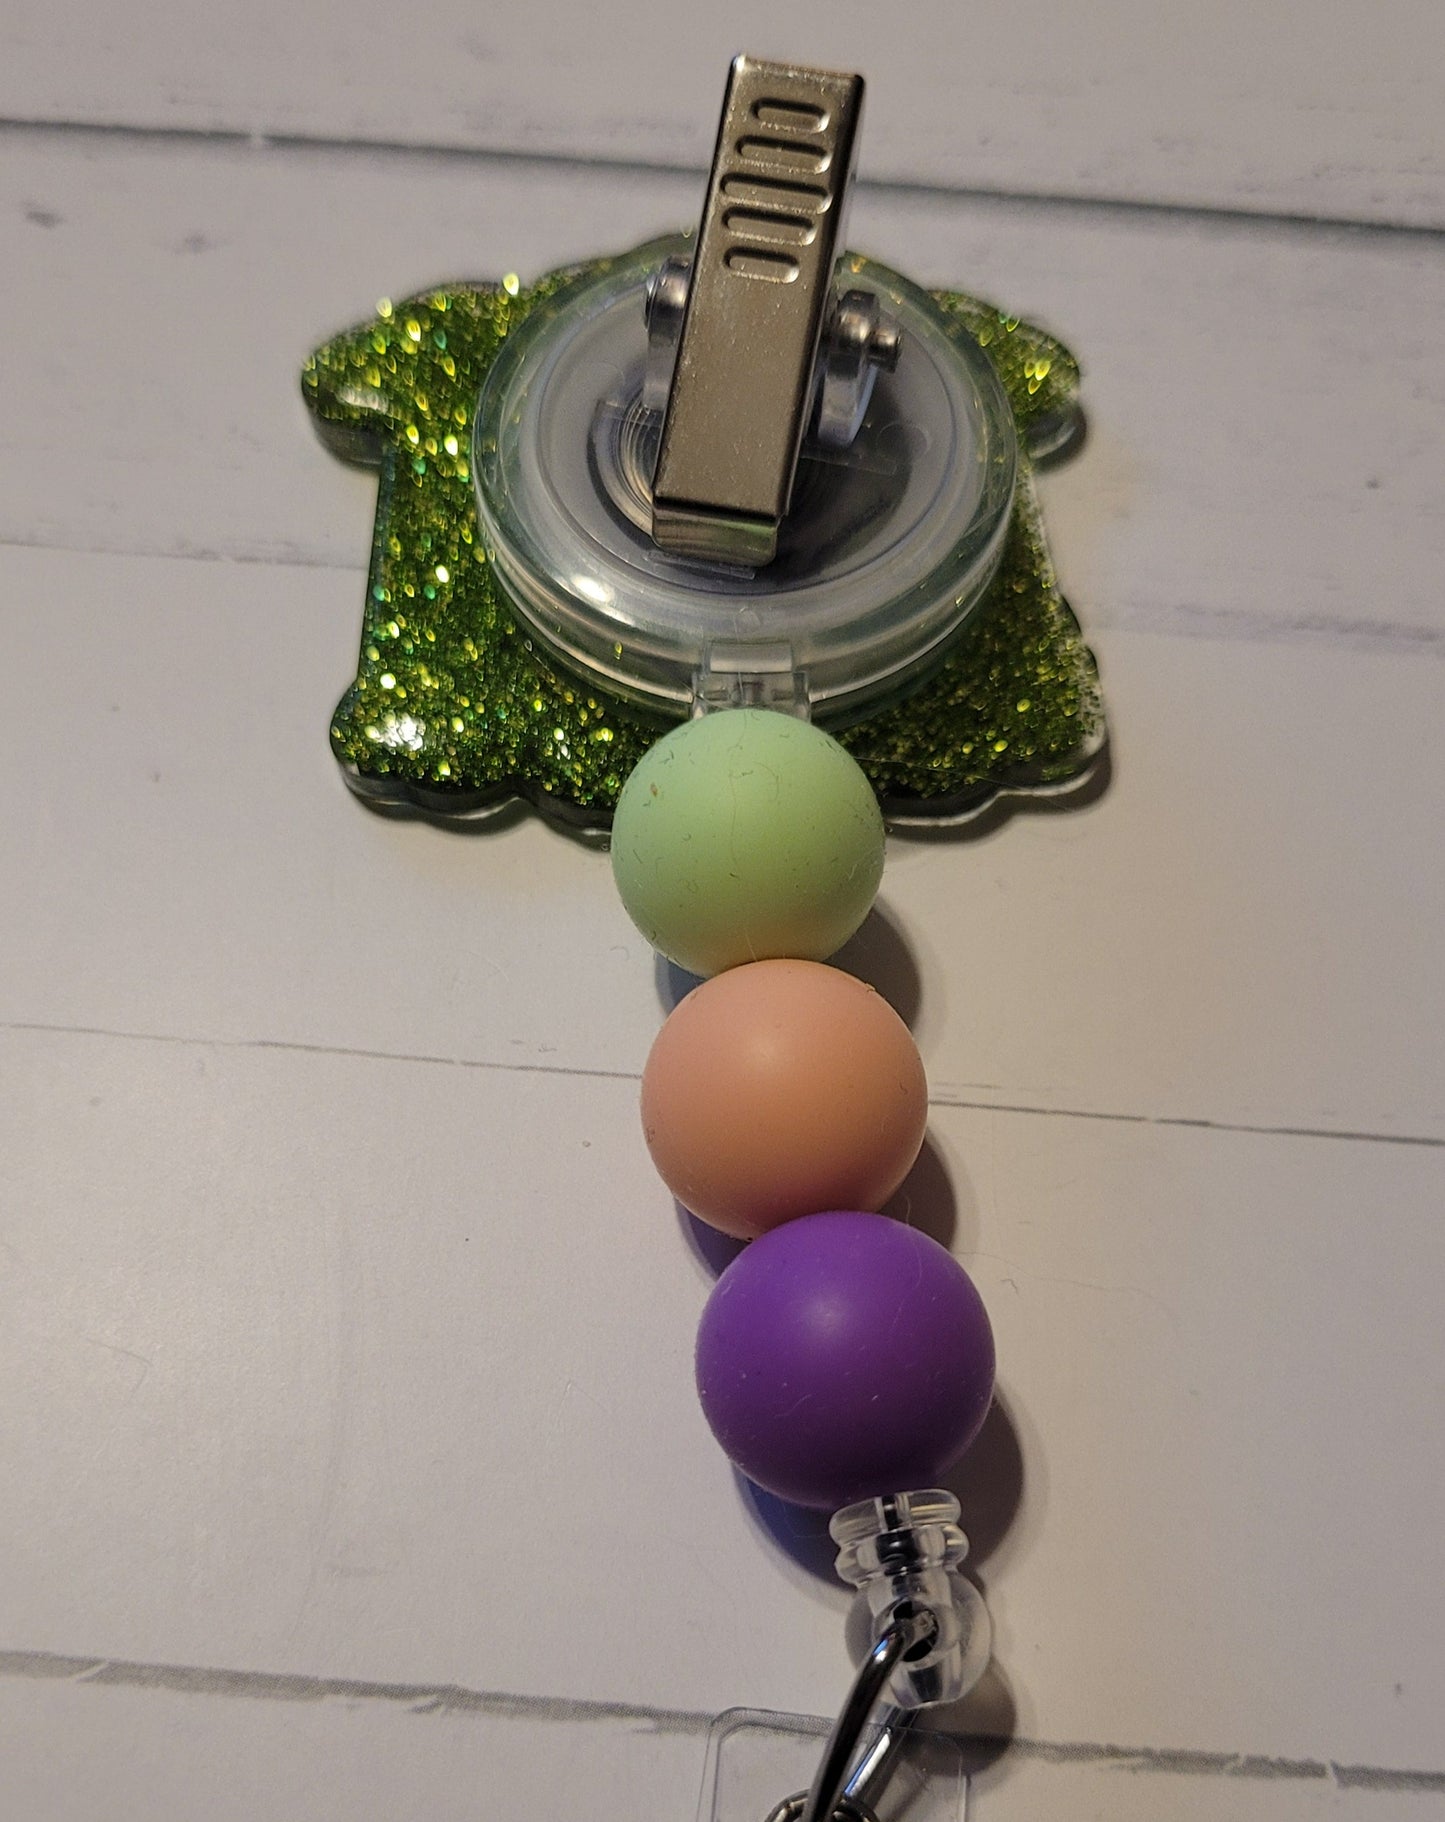 Ever wonder what really to the Dinosaurs? This fun Badge Reel playfully suggests they were beamed up to spaceships by aliens. 3 different ships beaming up various dinosaurs with a green glitter background and 3 fun colored silicone beads to finish the look.